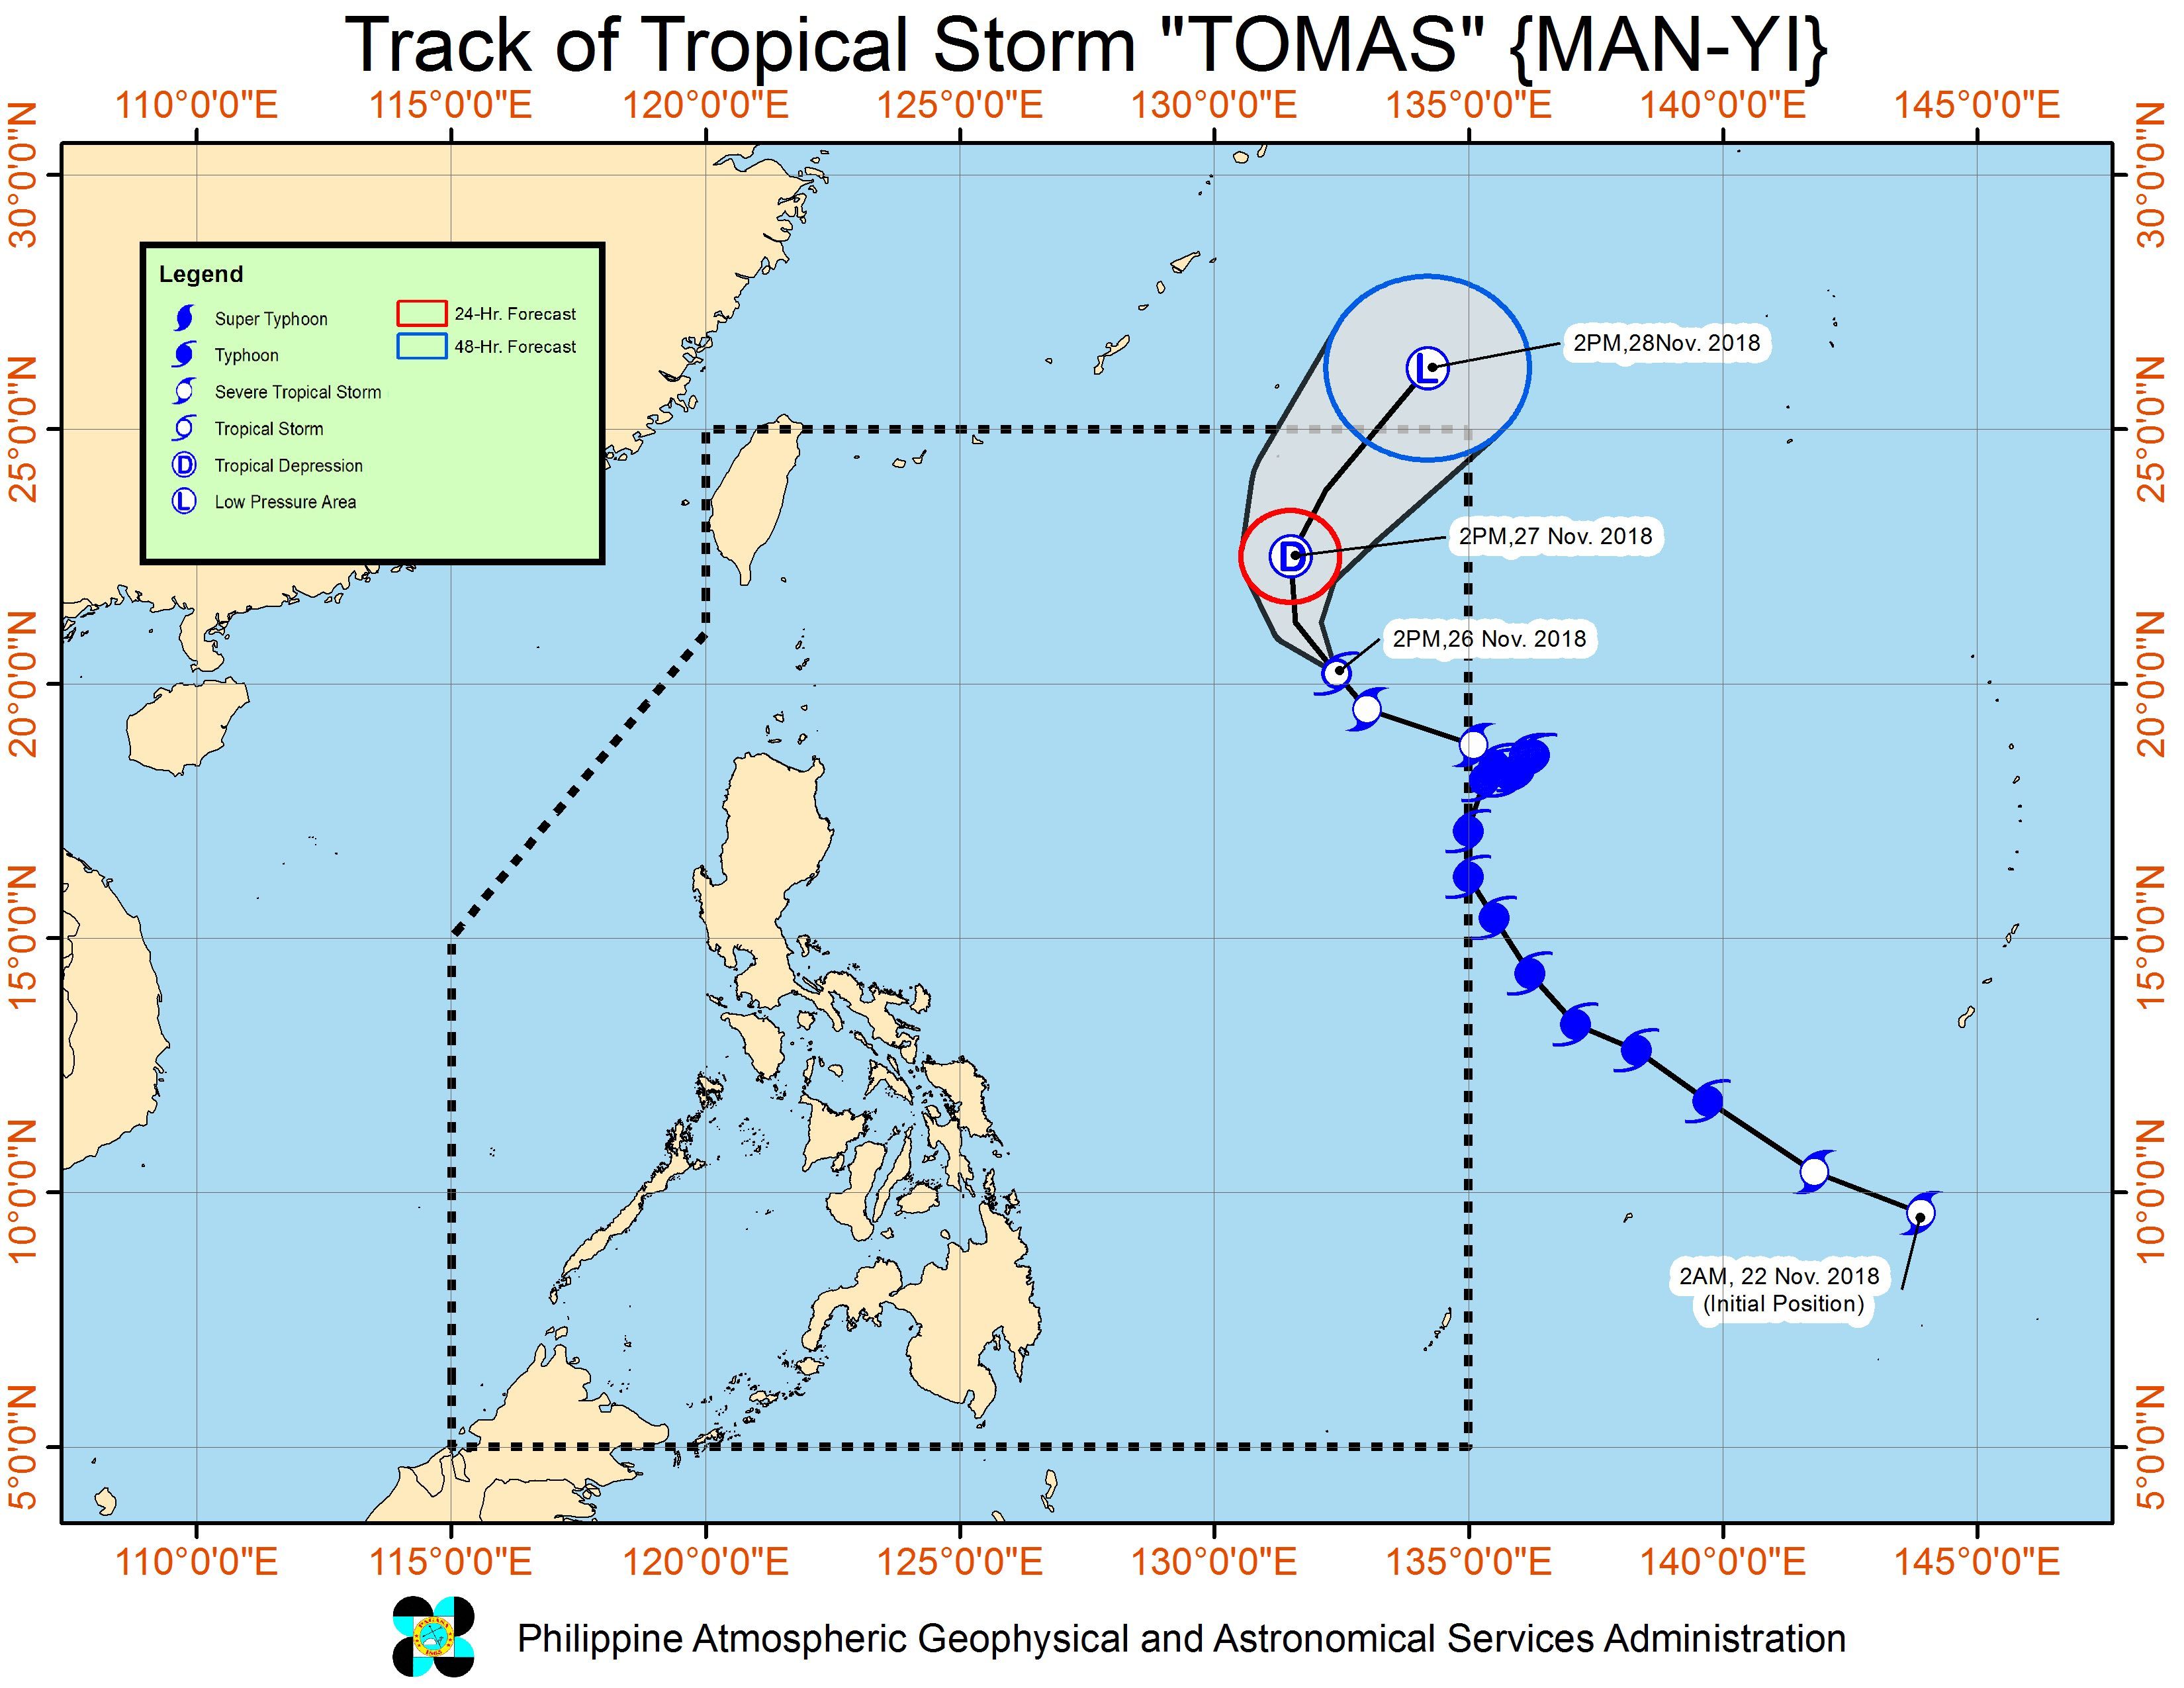 Forecast track of Tropical Storm Tomas (Man-yi) as of November 26, 2018, 5 pm. Image from PAGASA 